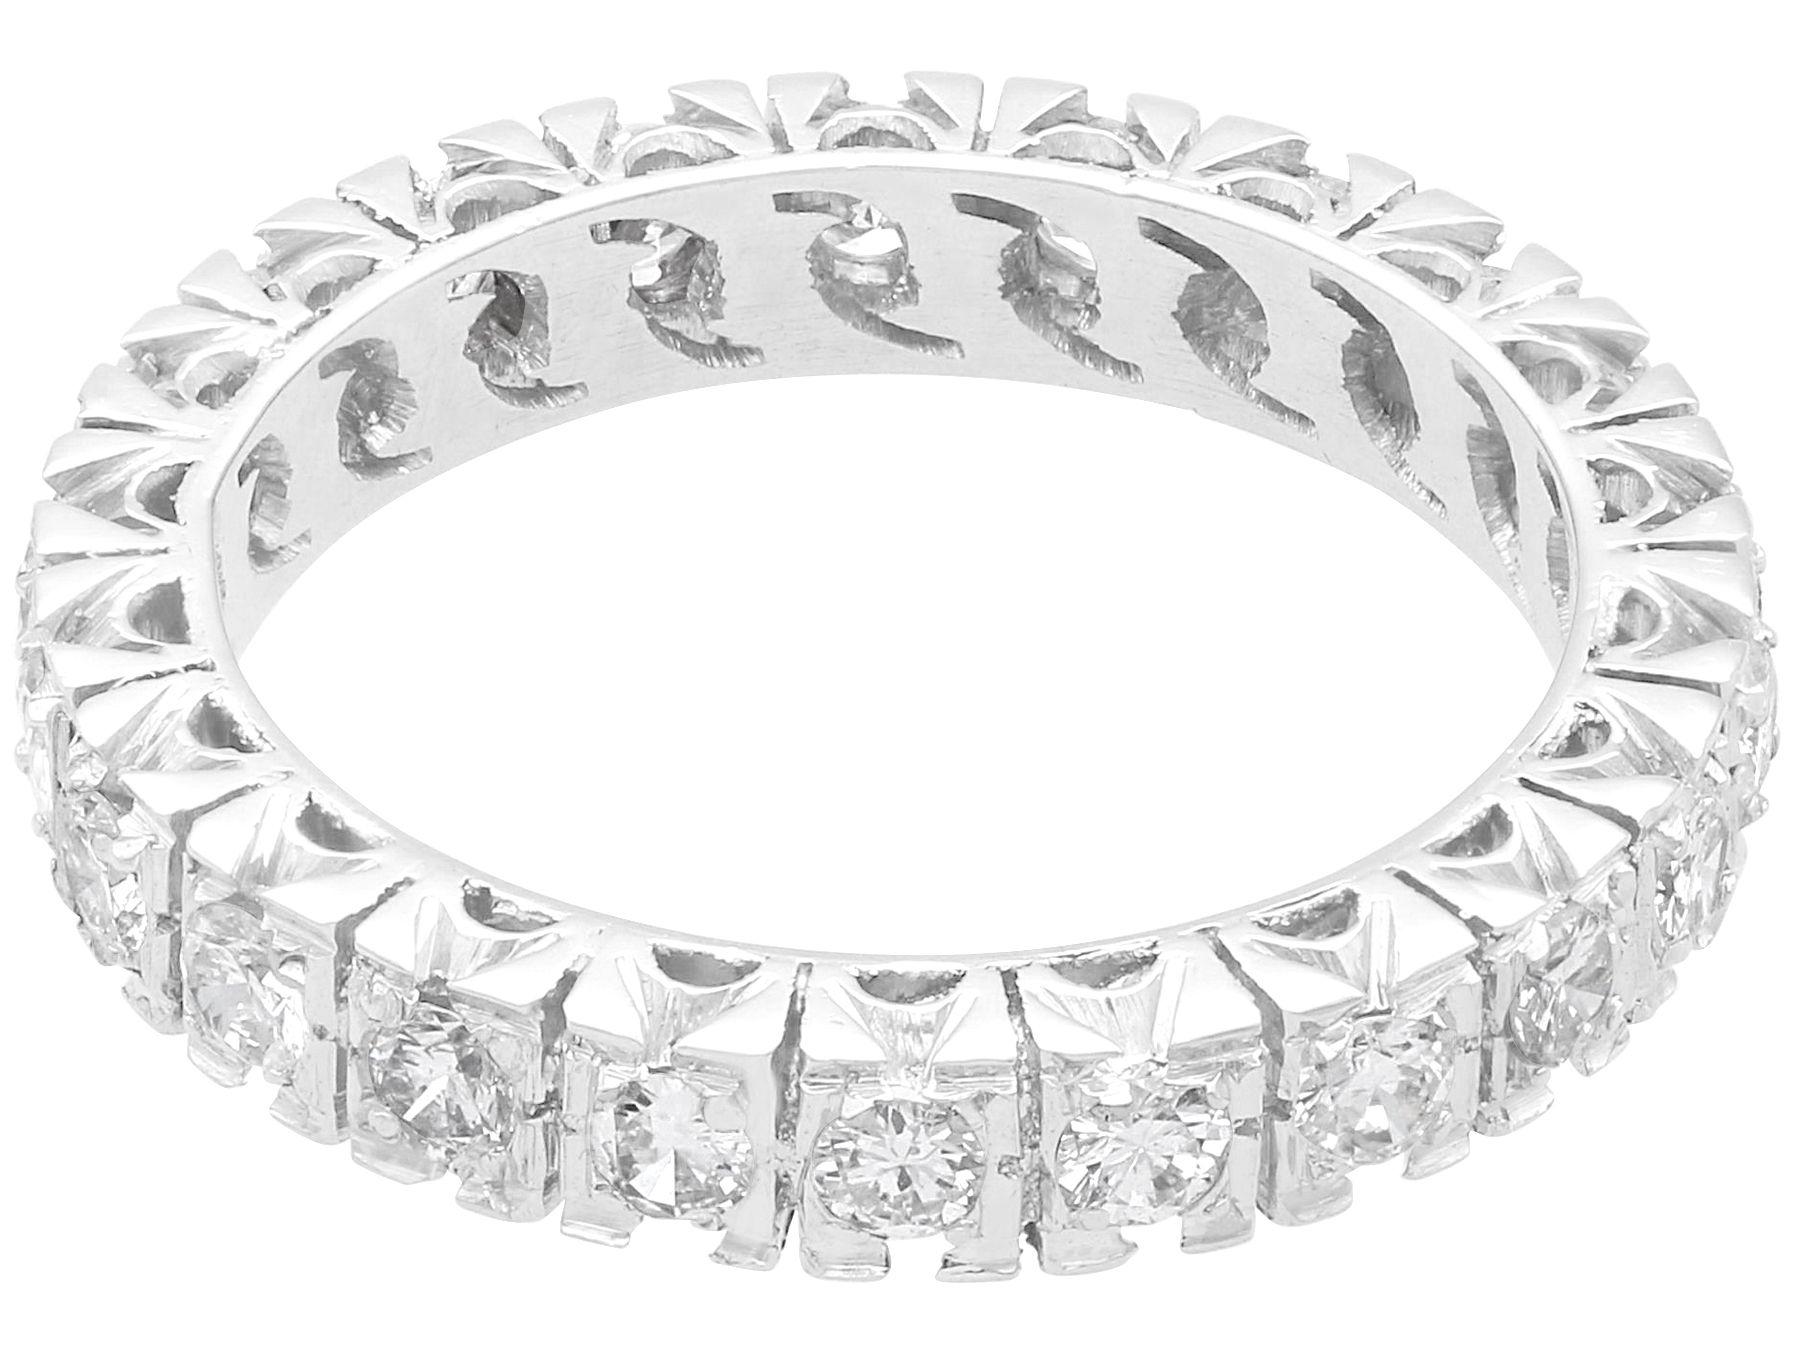 Vintage 1.20ct Diamond, Platinum and Palladium Full Eternity Ring, circa 1940 In Excellent Condition For Sale In Jesmond, Newcastle Upon Tyne